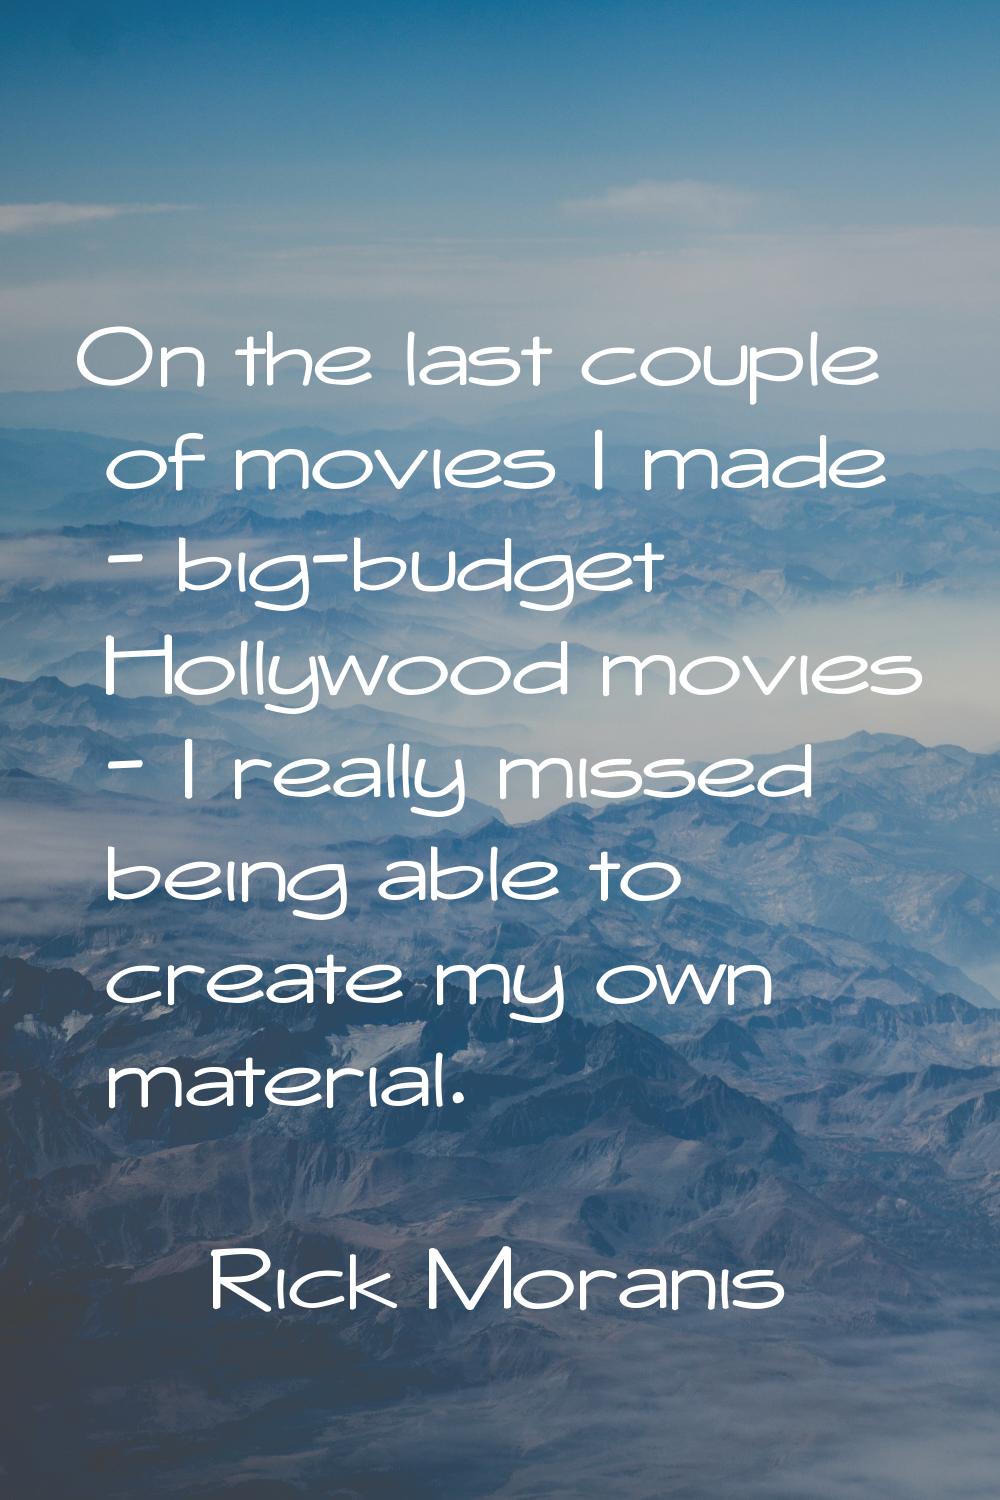 On the last couple of movies I made - big-budget Hollywood movies - I really missed being able to c